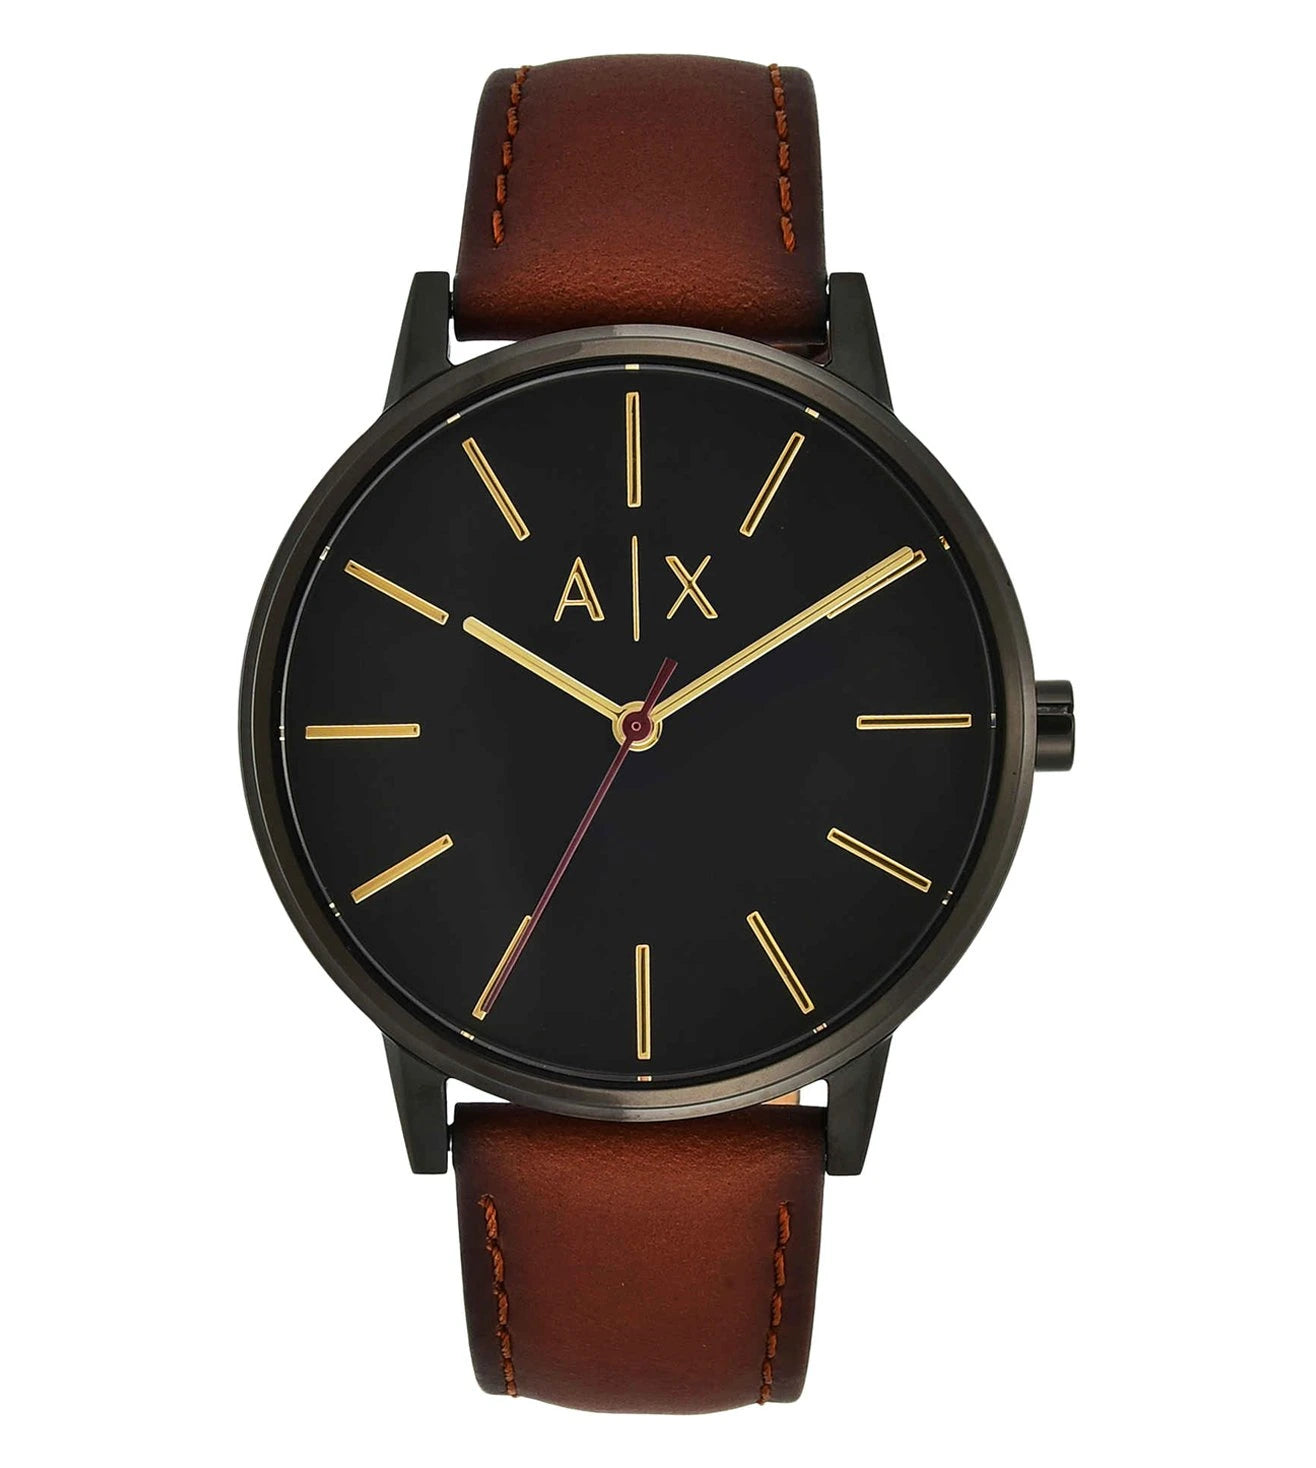 AX2706 | ARMANI EXCHANGE Cayde Analog Watch for Men